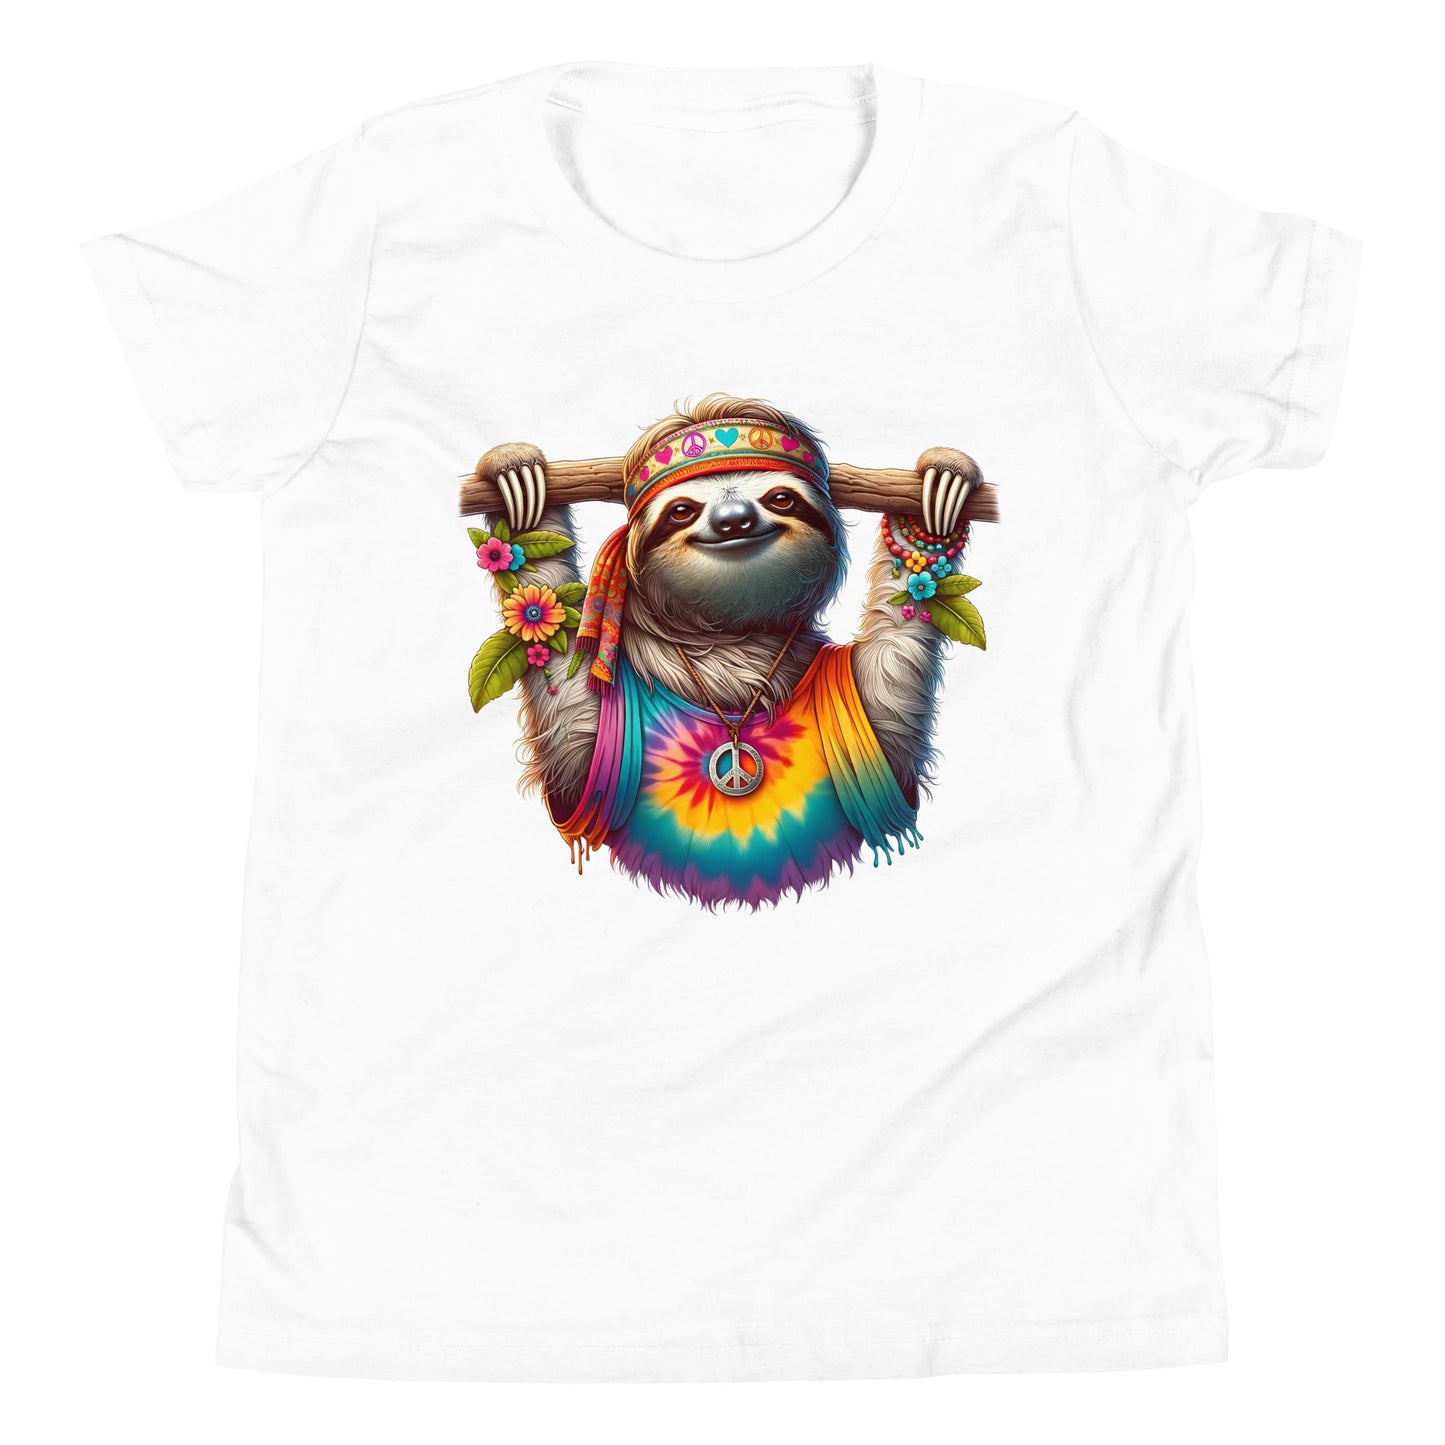 Hippie Sloth Youth T-Shirt